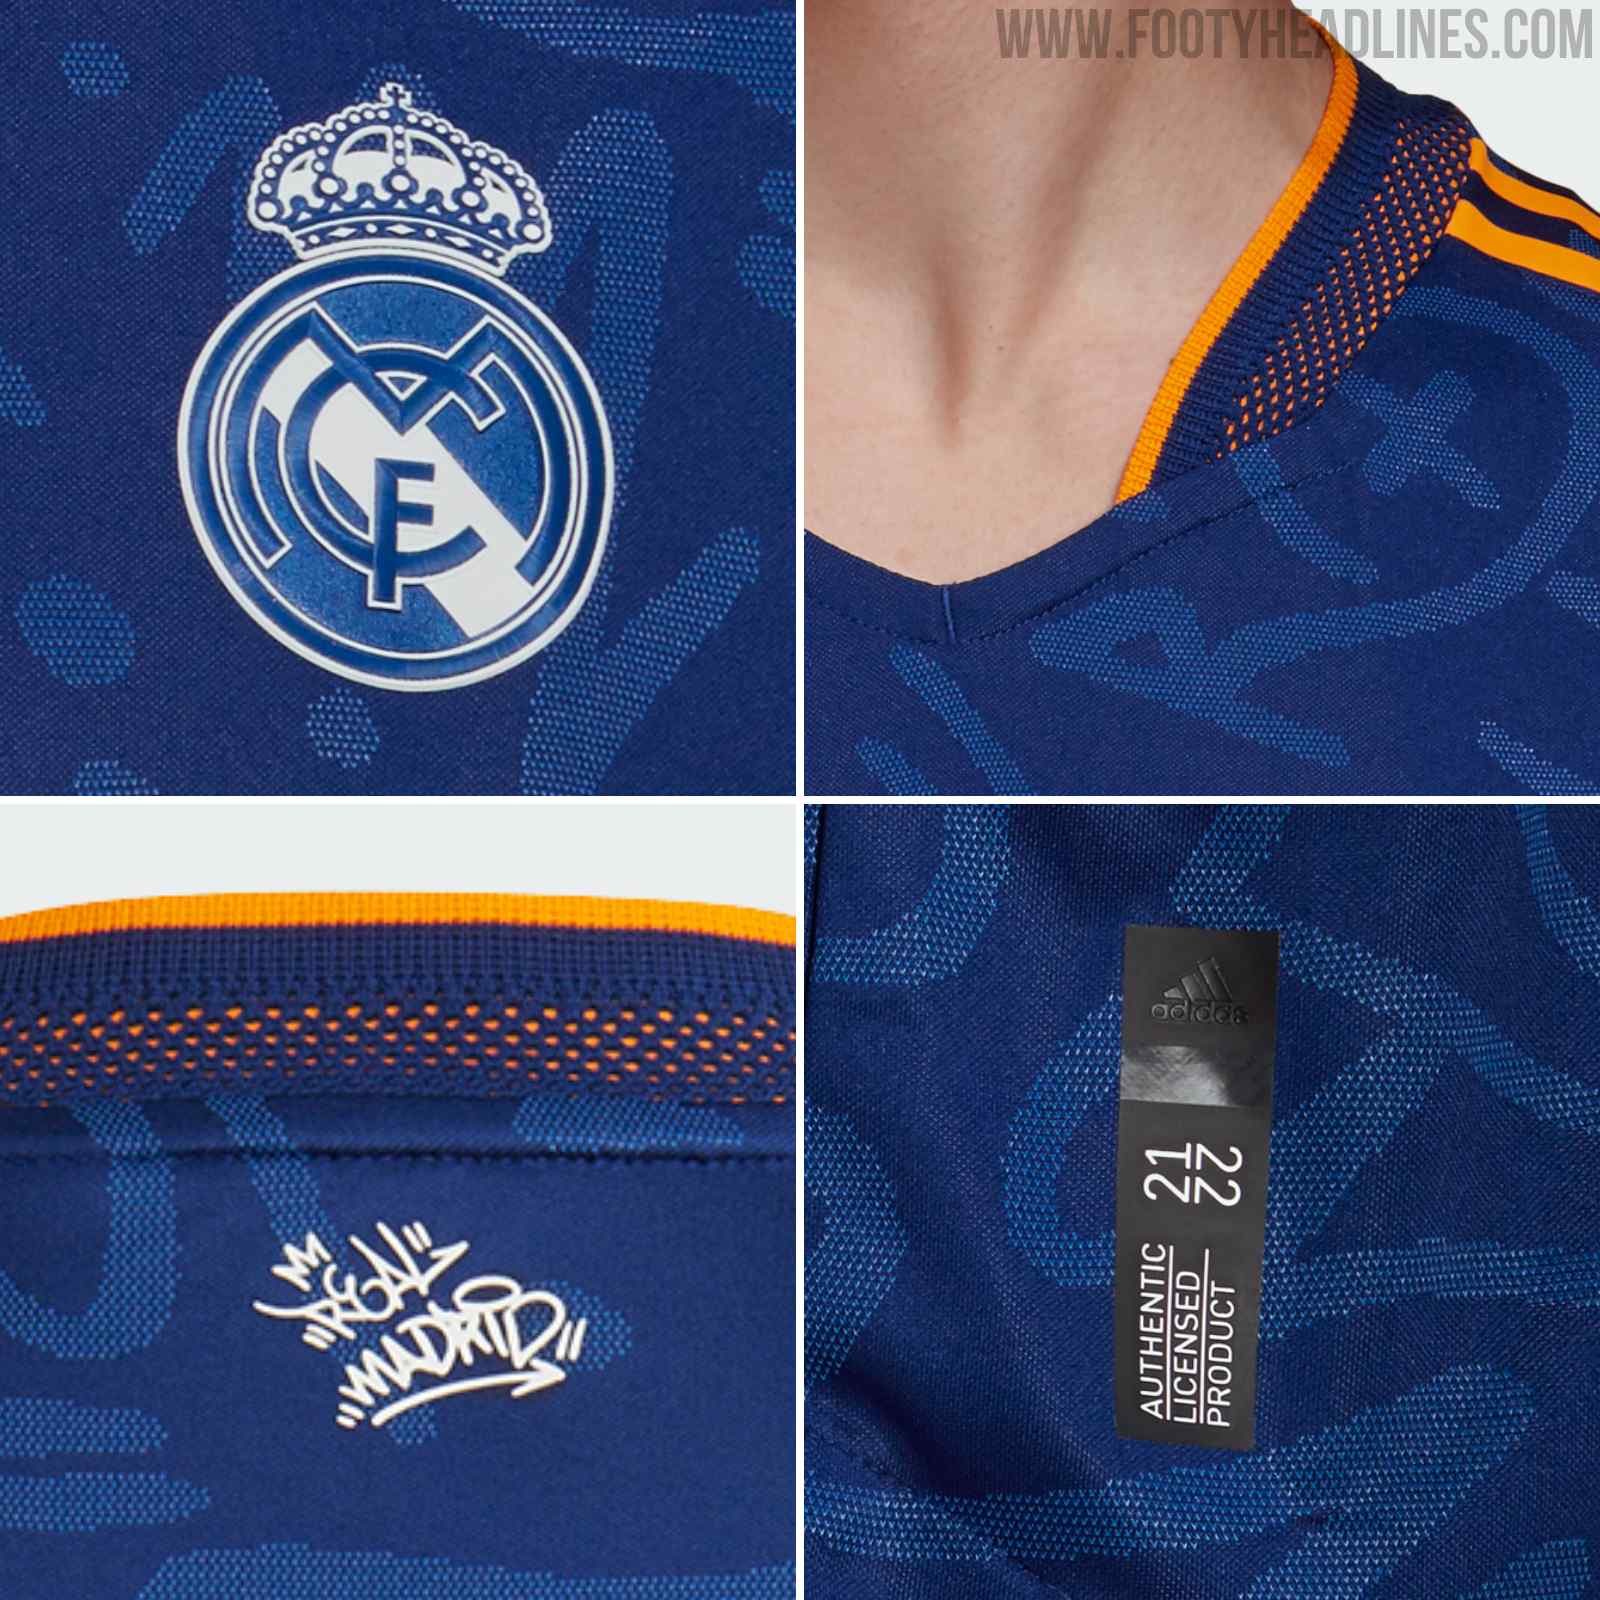 REAL MADRID 2021/22 SEASON AWAY JERSEY, INSPIRED BY THE GRAFFITI ART OF THE  CITY